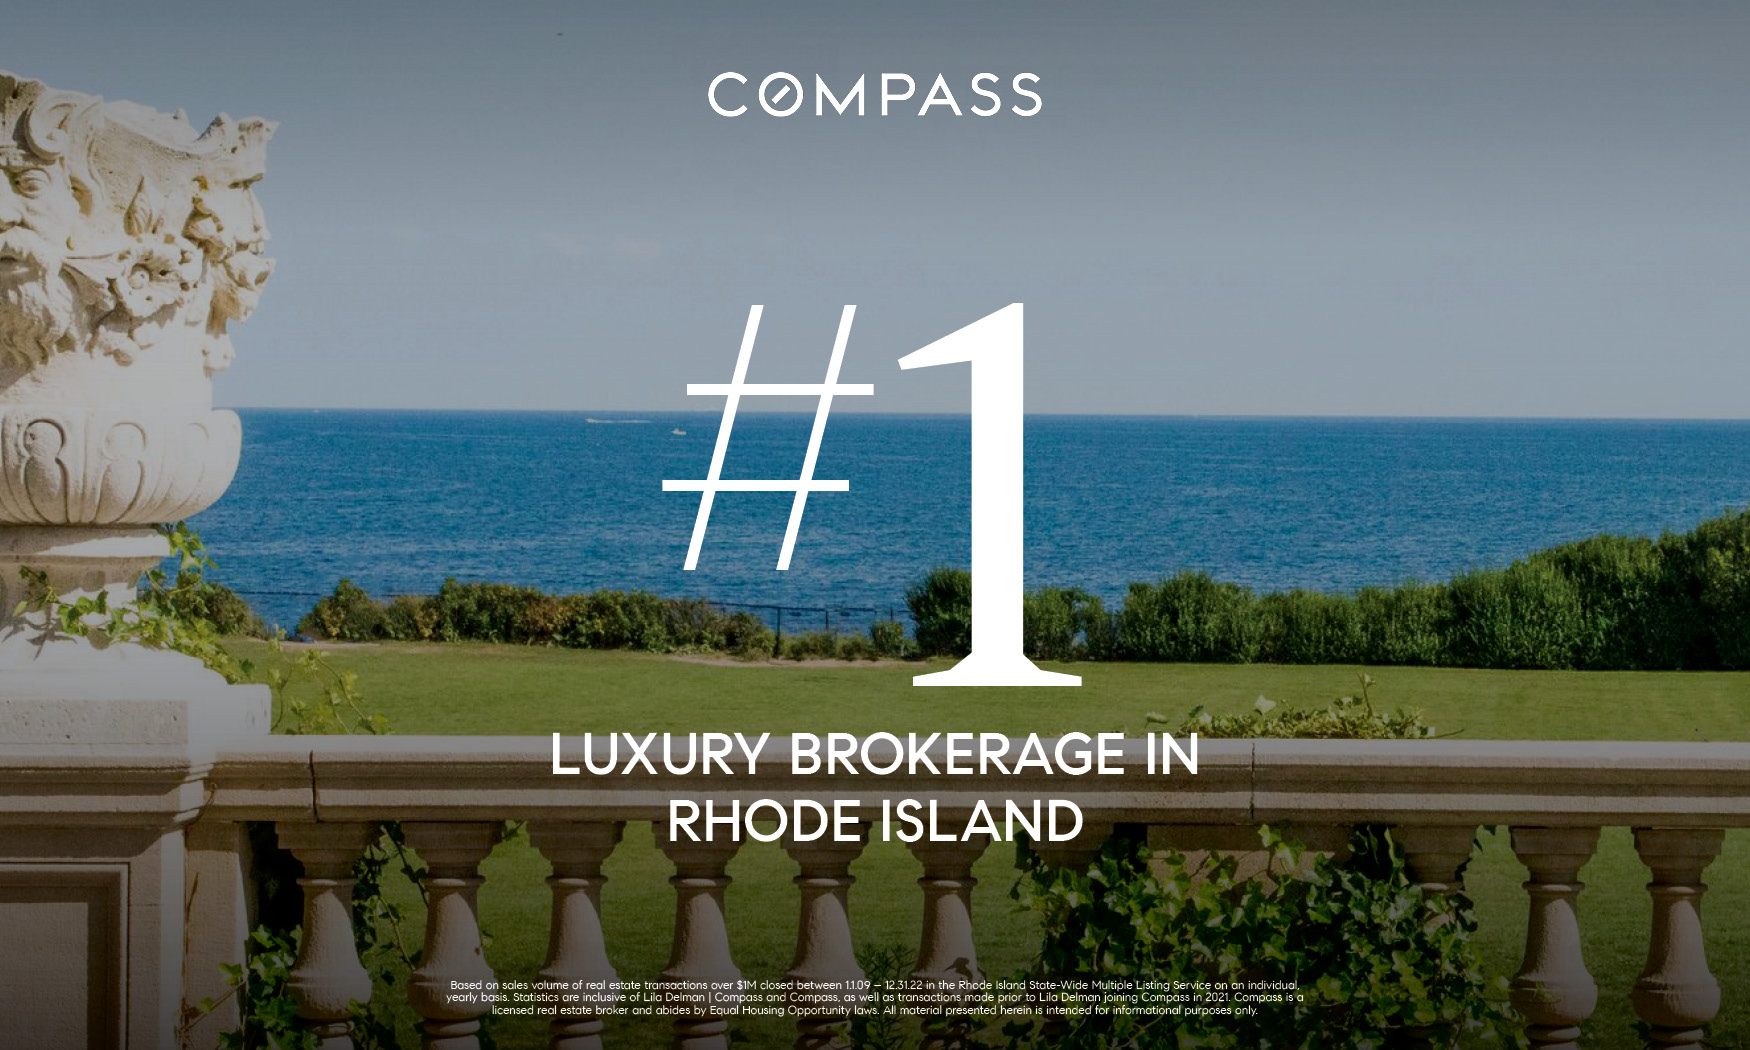 COMPASS LEADS RHODE ISLAND’S LUXURY REAL ESTATE MARKET AND CELEBRATES $1B+ IN SALES IN 2022*